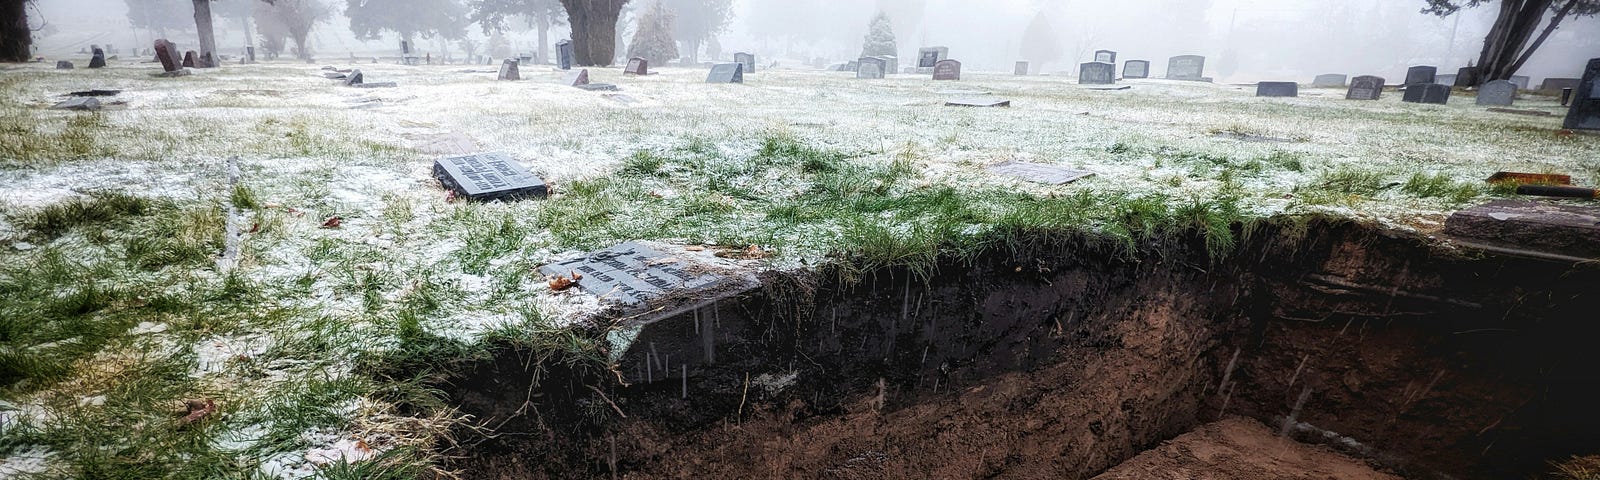 A snow covered field with an old casket in an open grave